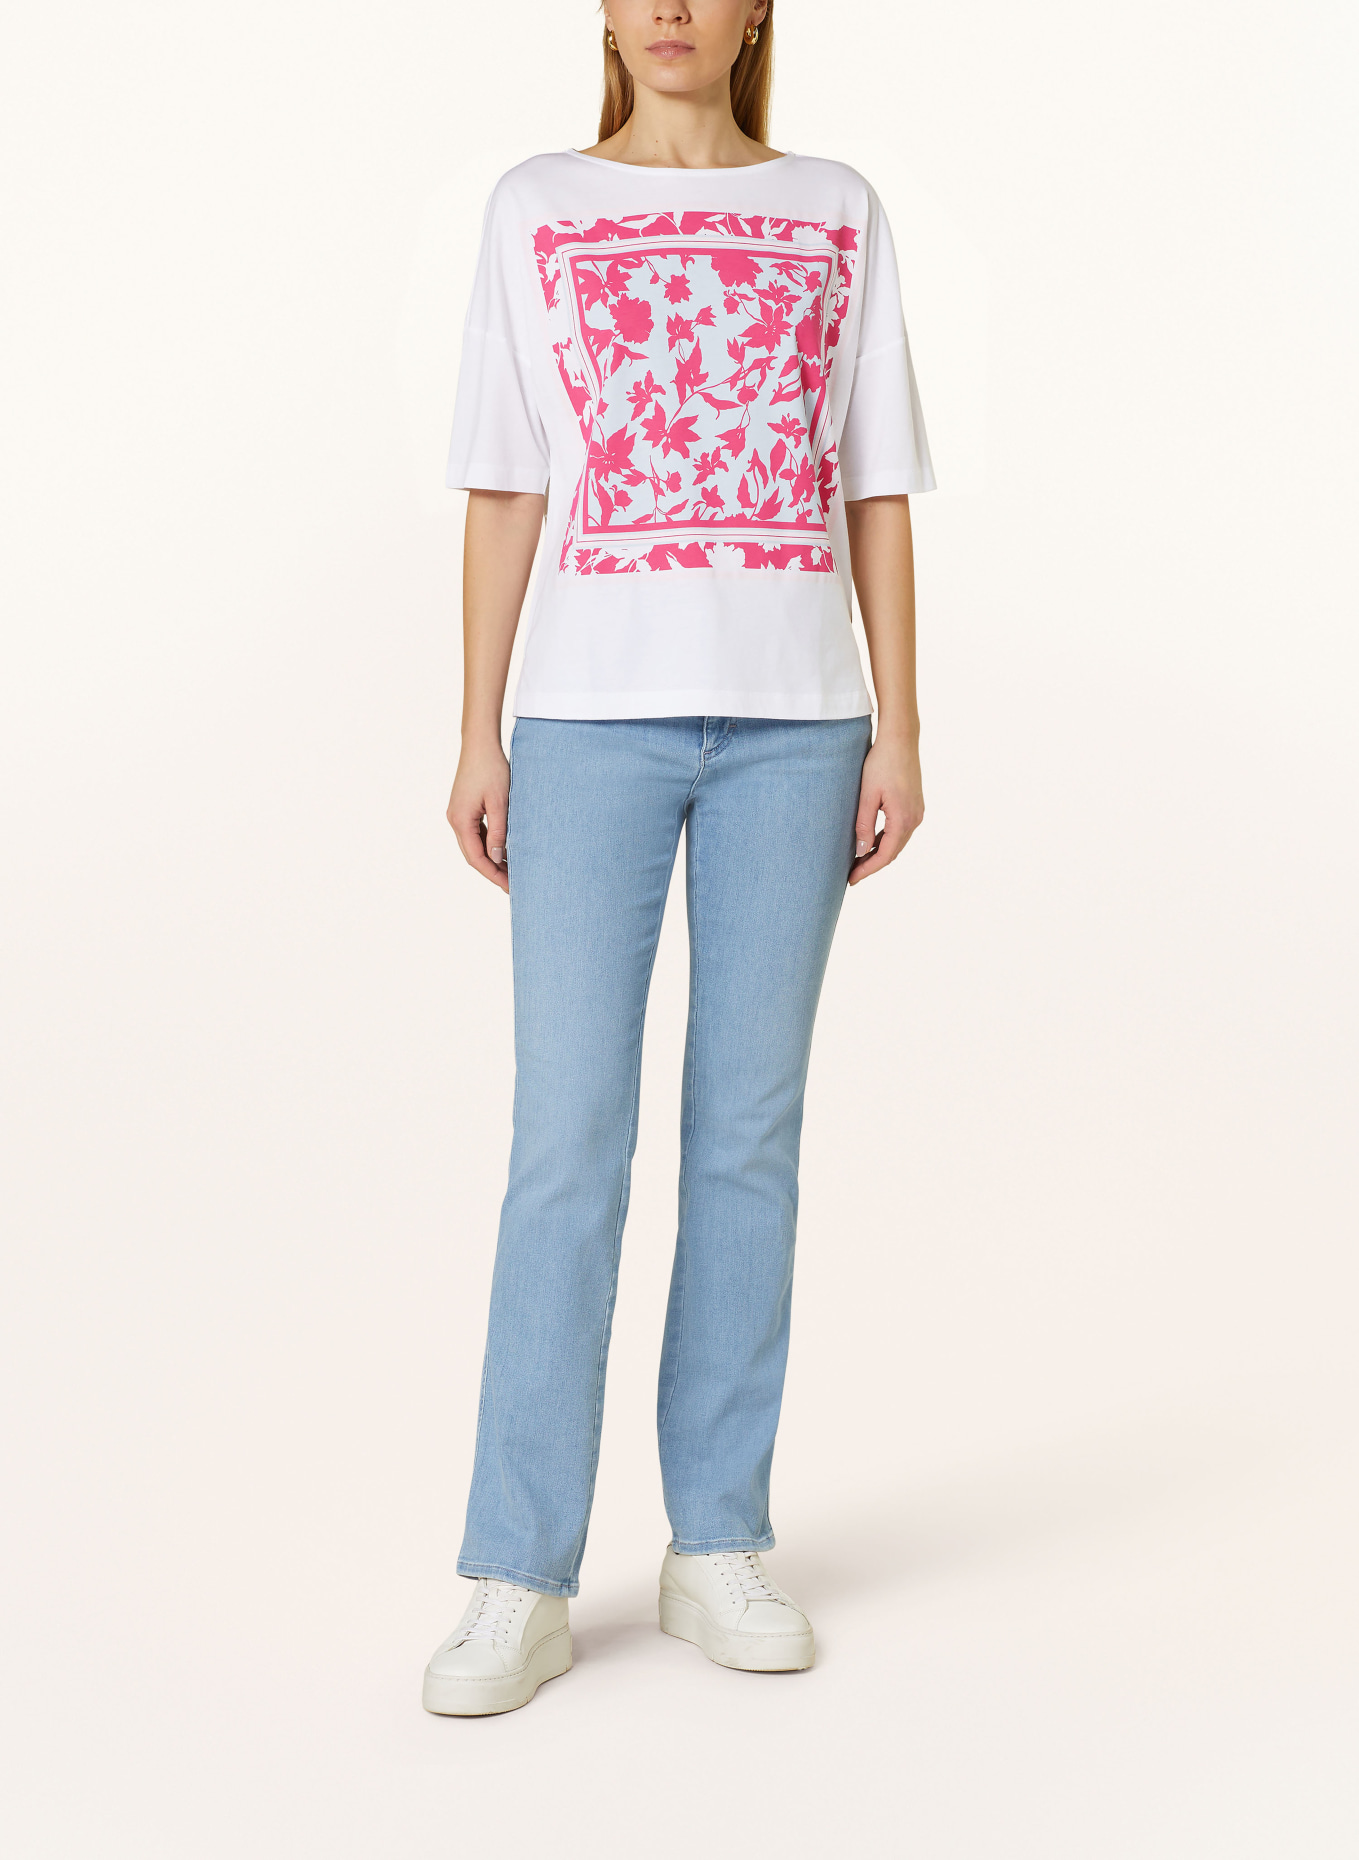 MAERZ MUENCHEN T-shirt, Color: WHITE/ PINK/ LIGHT BLUE (Image 2)